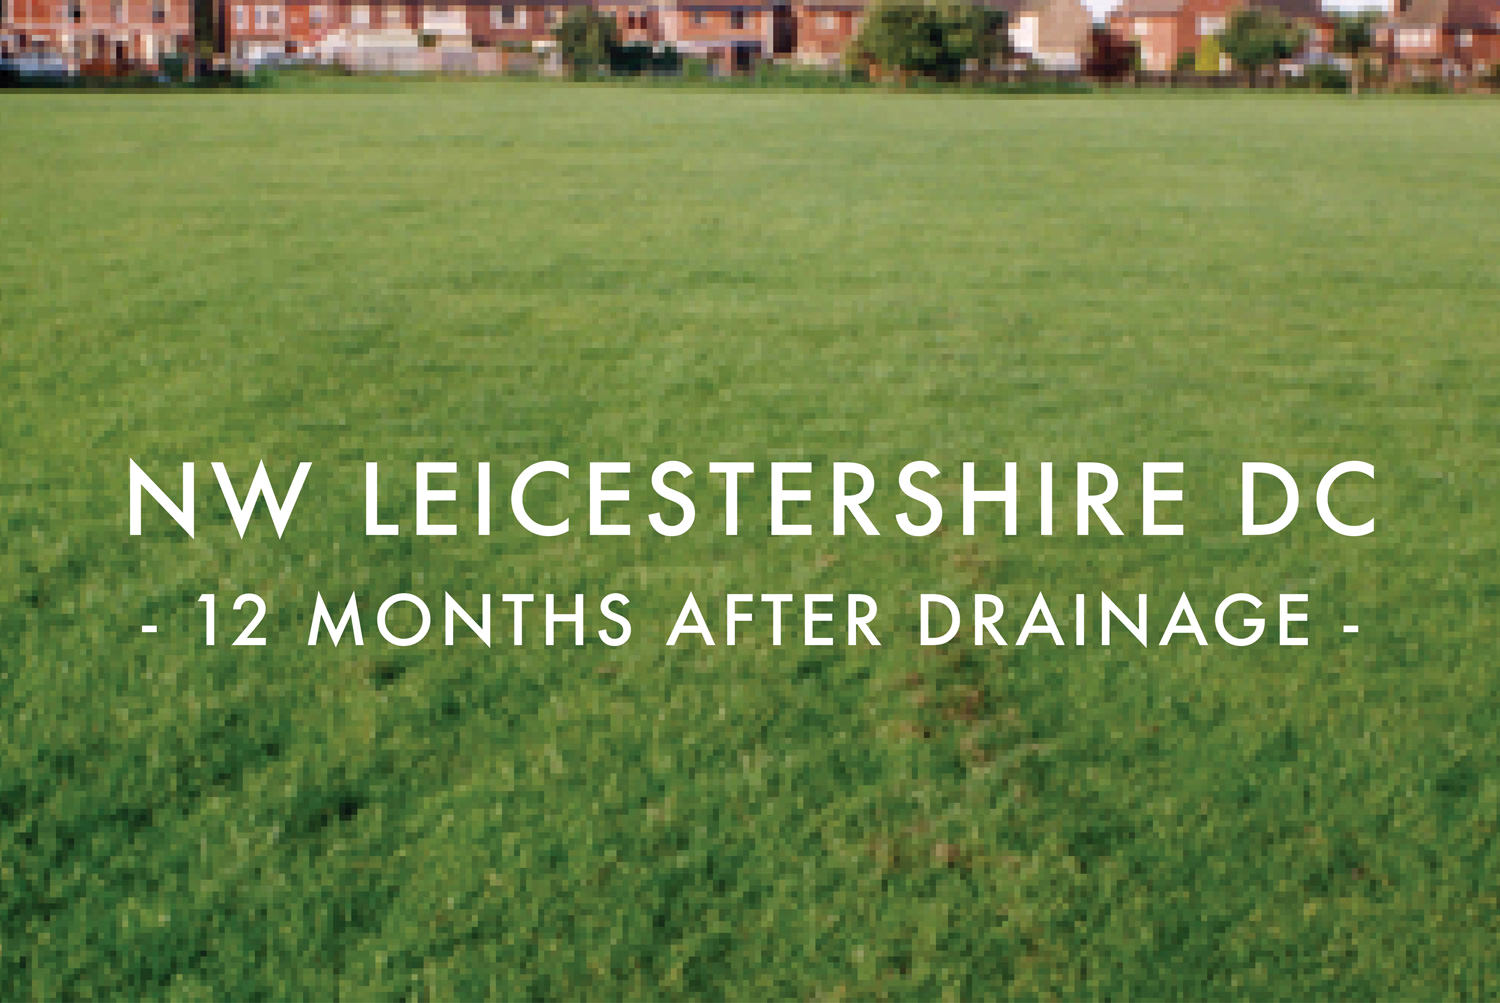 NW Leicestershire FC - After Drainage